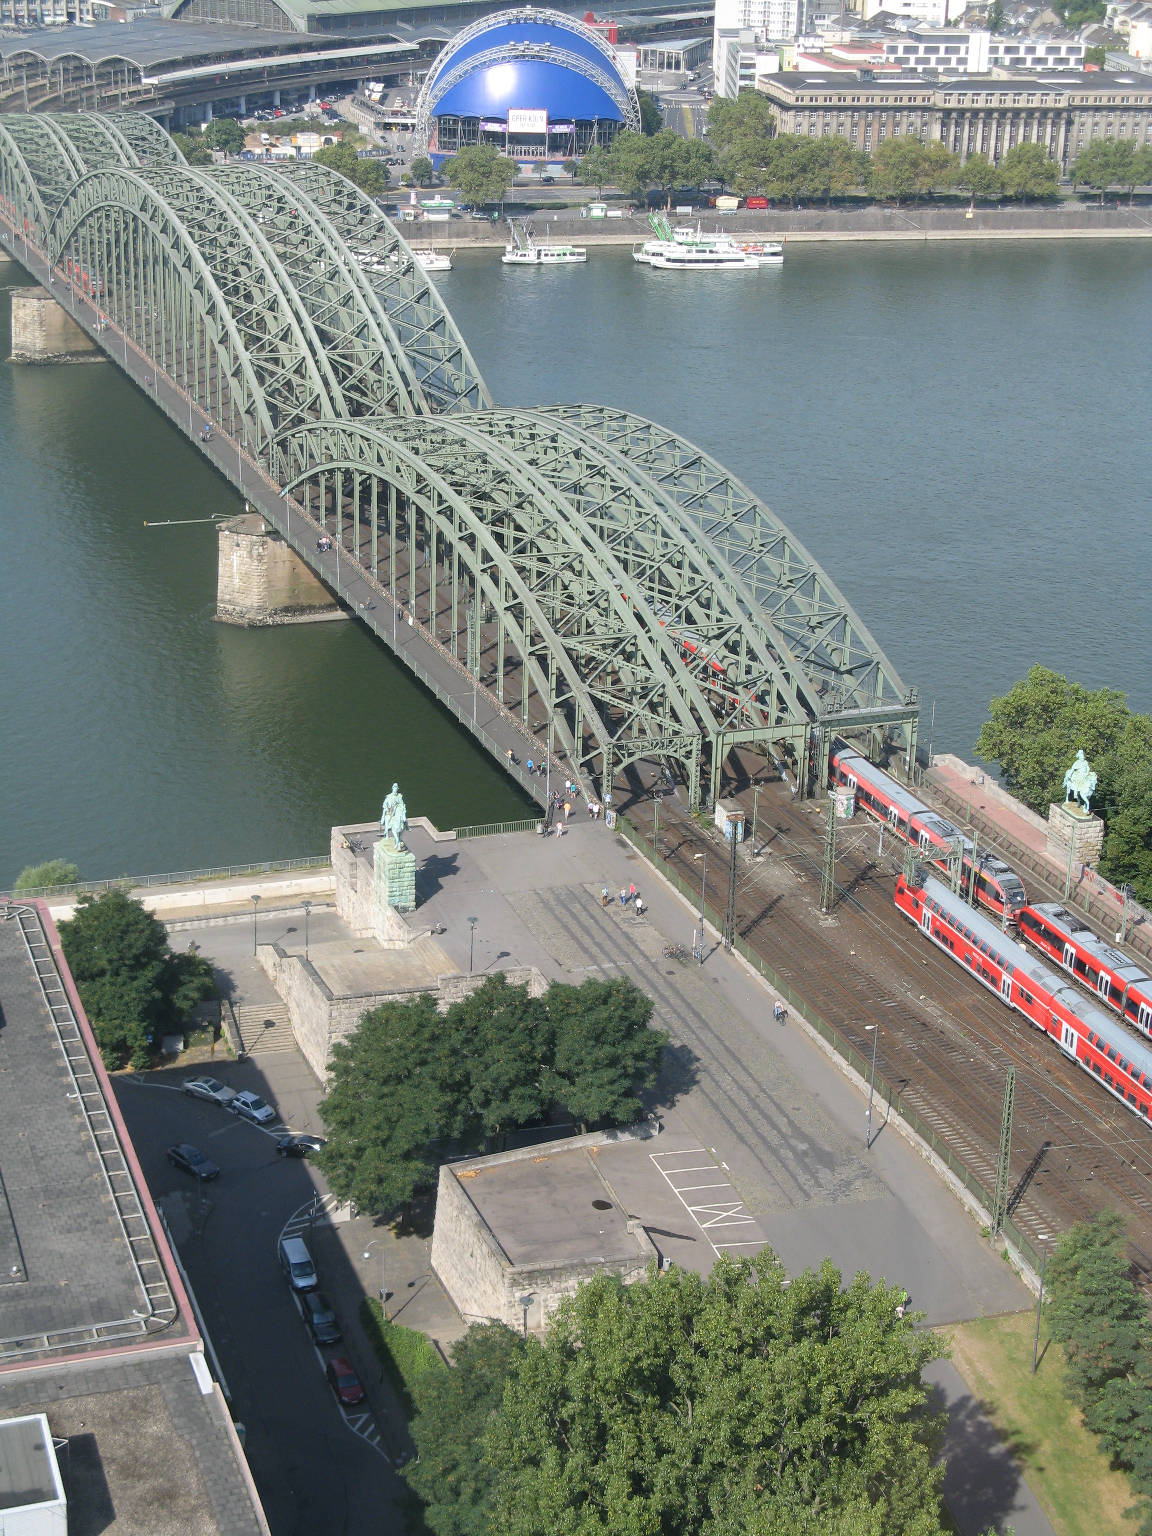 Two trains pass on the Hohenzollern Bridge